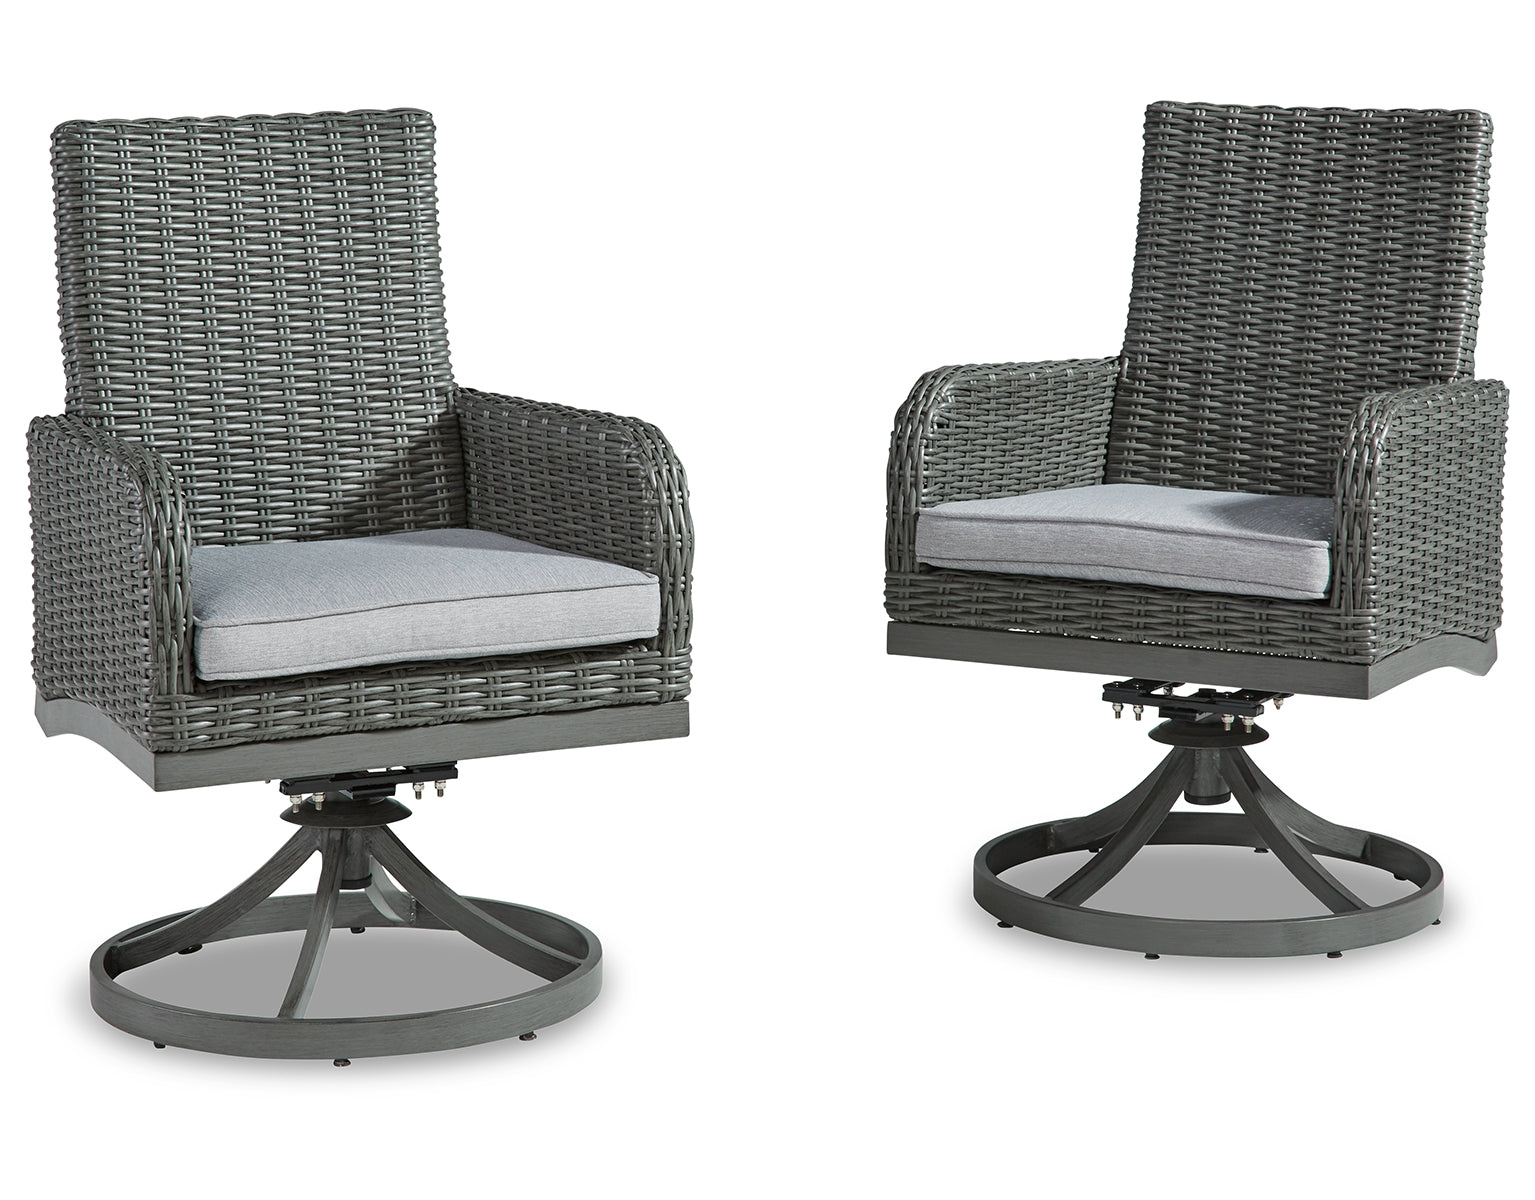 Elite Park Swivel Chair with Cushion (Set of 2)